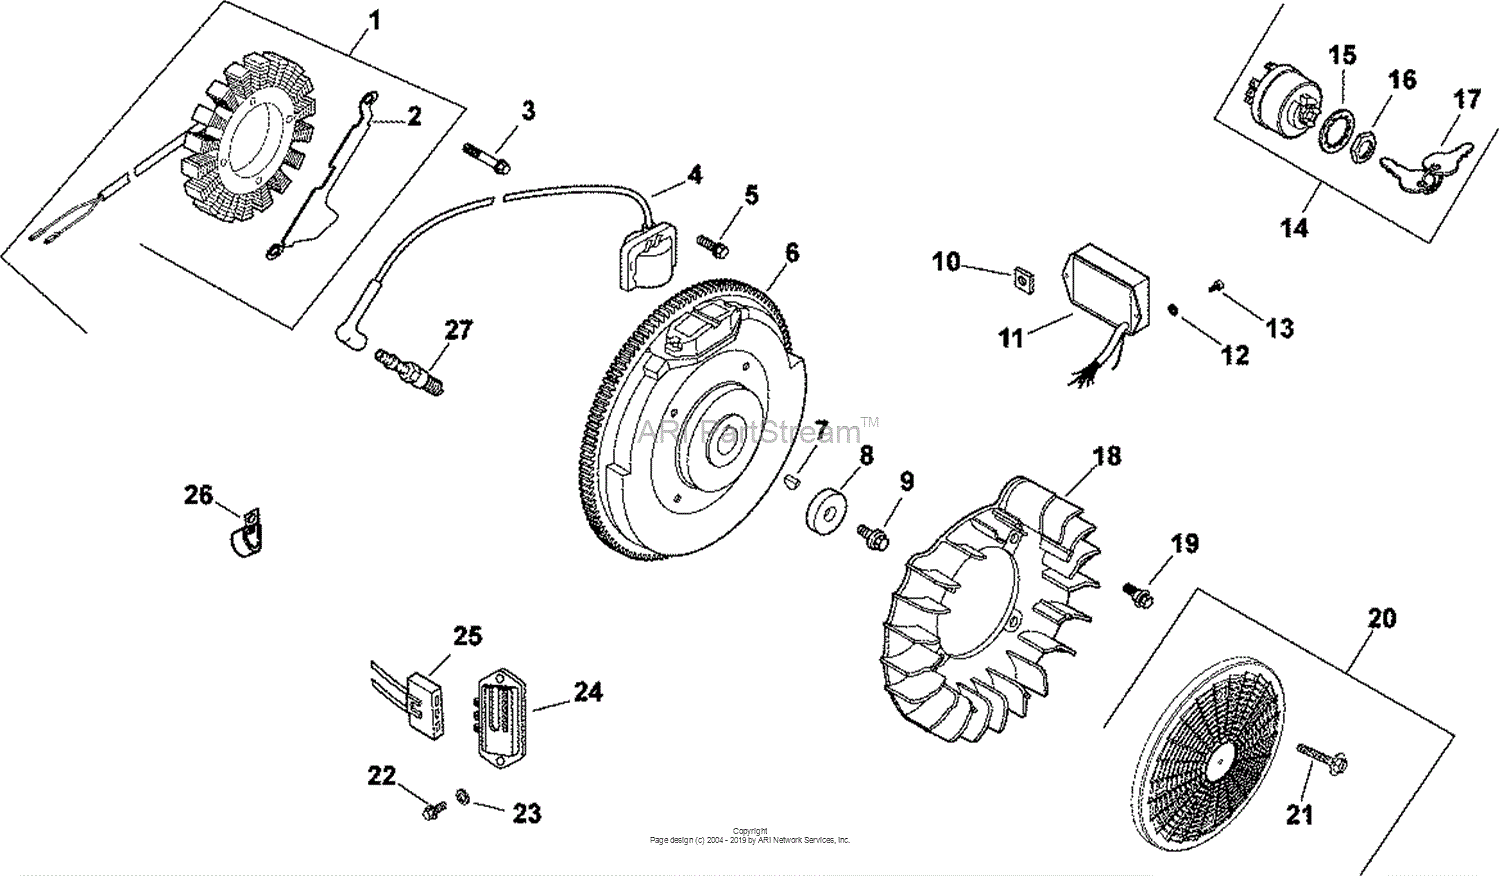 Kohler CH740-0080 MUD BUDDY 25 HP (18.6 kW) Parts Diagram for Ignition ...